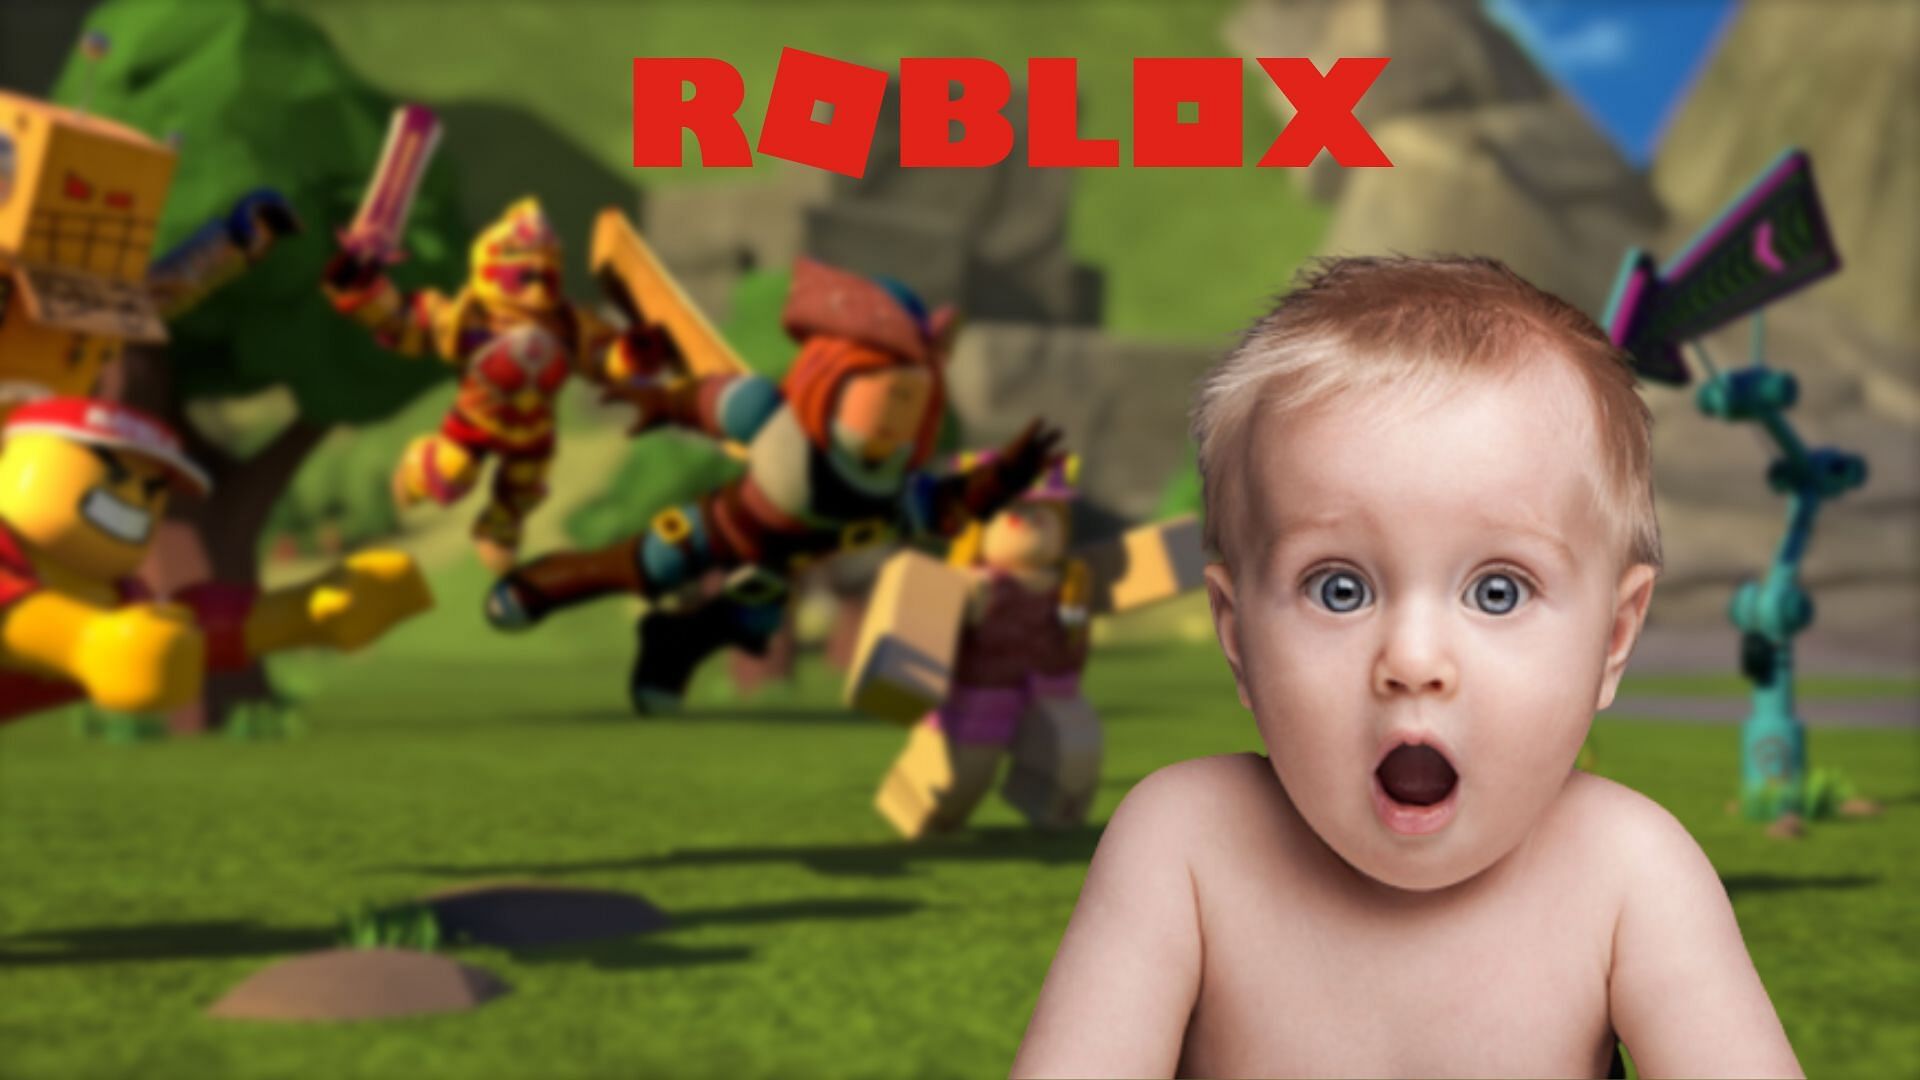 These Roblox games are perfect for kids (Image via Roblox and tommasolizzul)